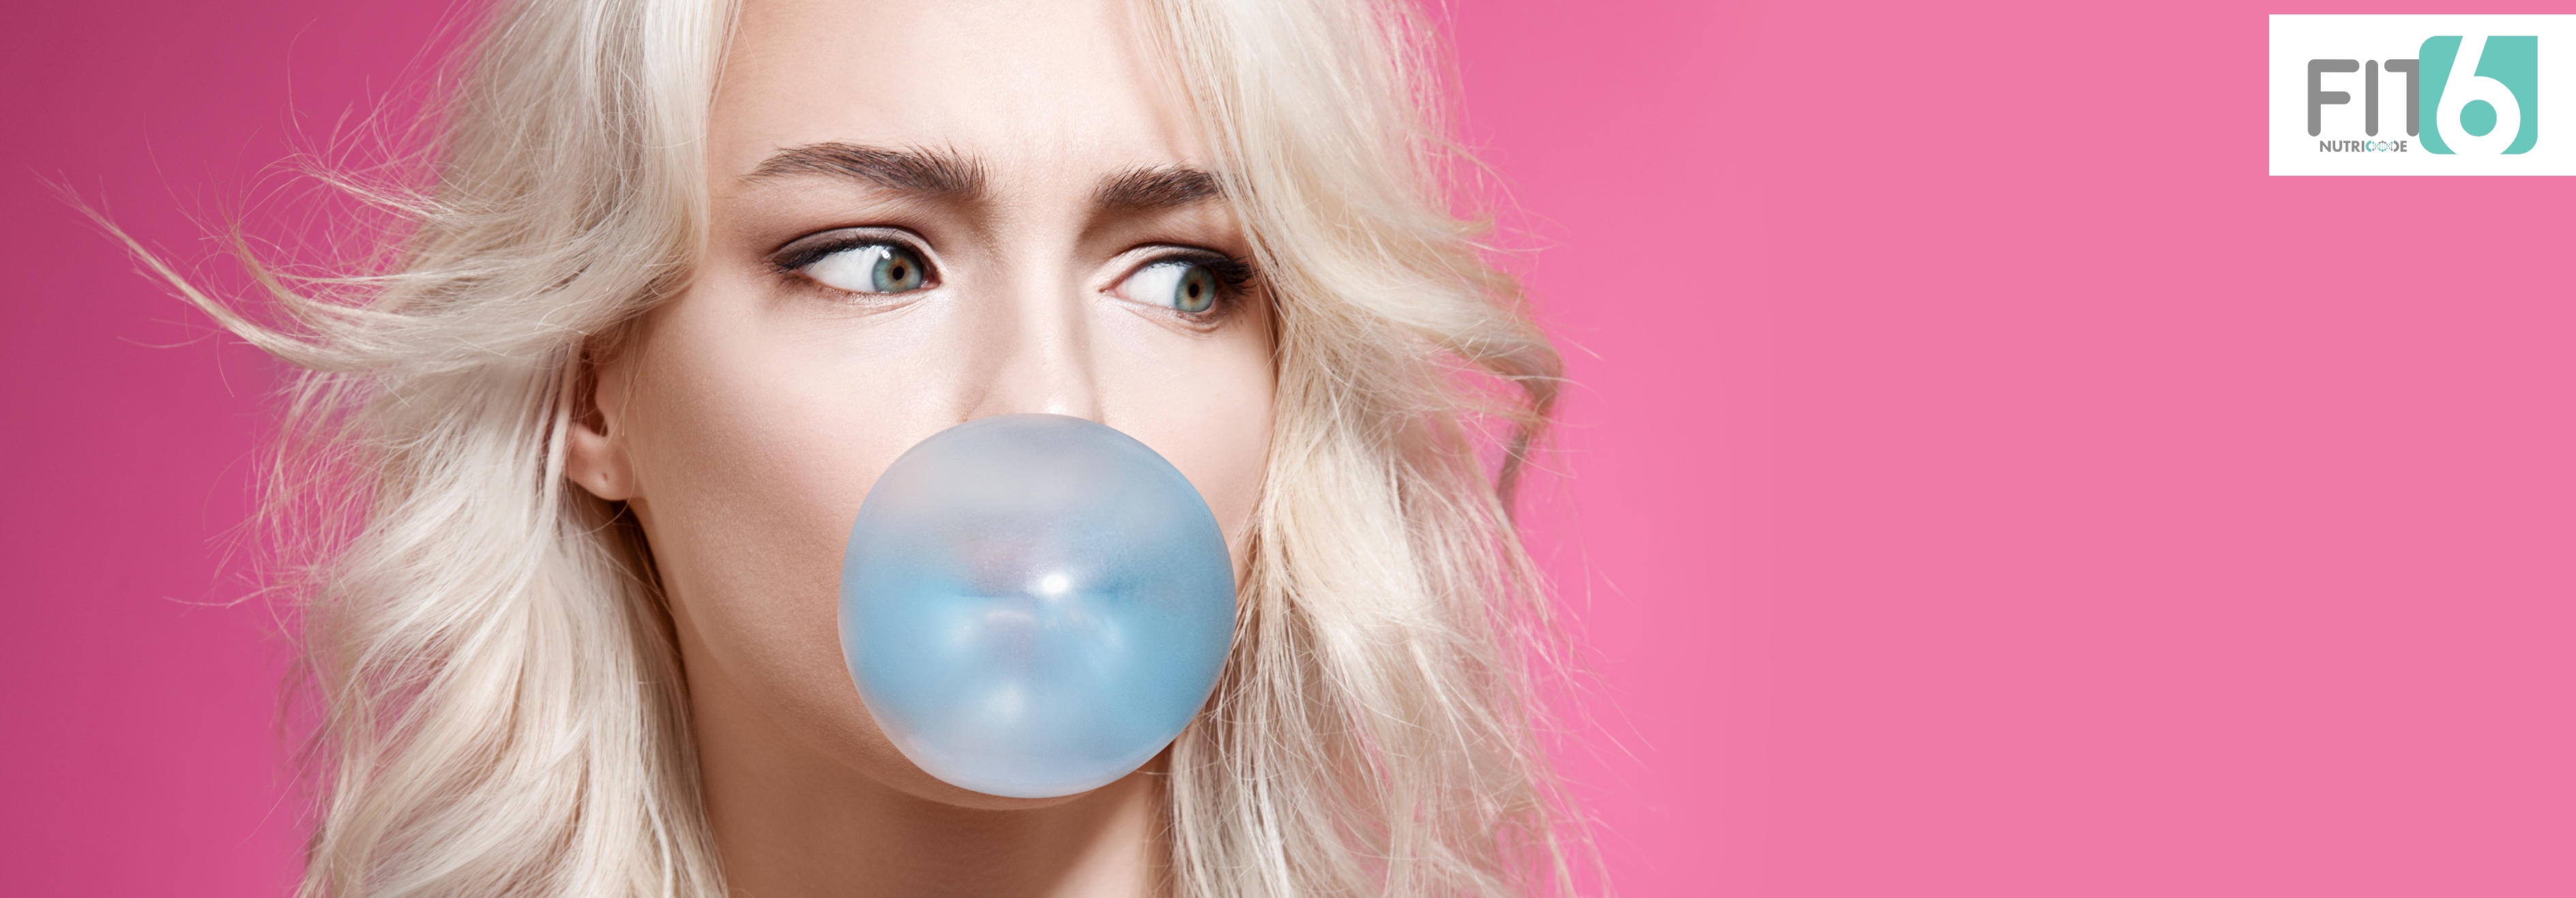 Chewing gum? We say NO!